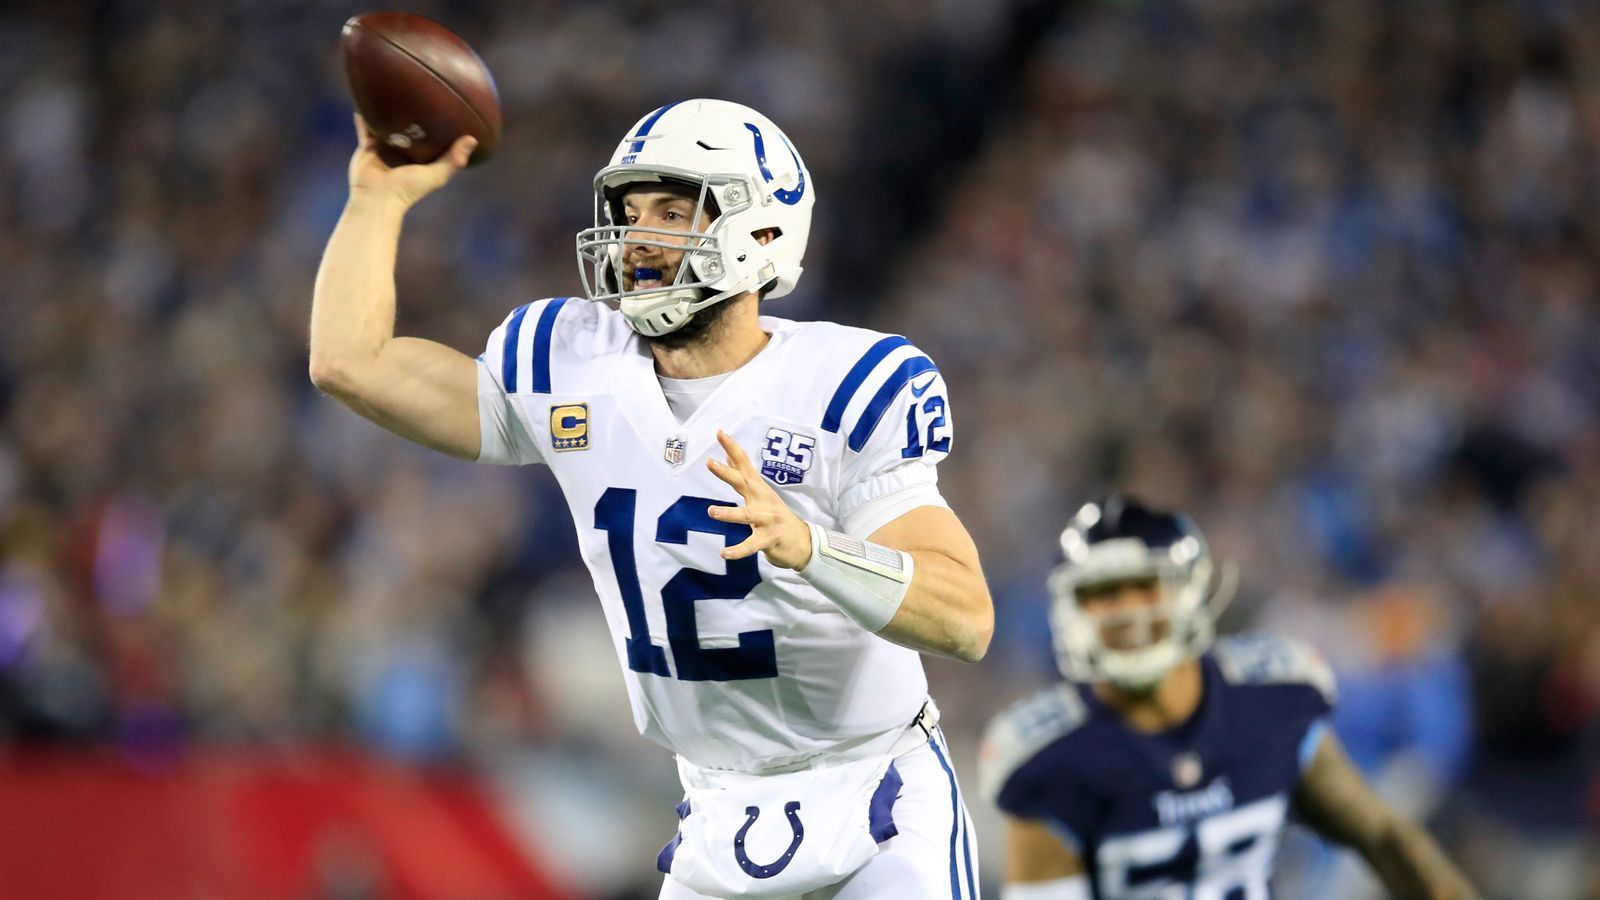 
                <strong>Indianapolis Colts: Andrew Luck</strong><br>
                Gesamtverdienst 2019: 21.125.000 DollarQuarterback
              